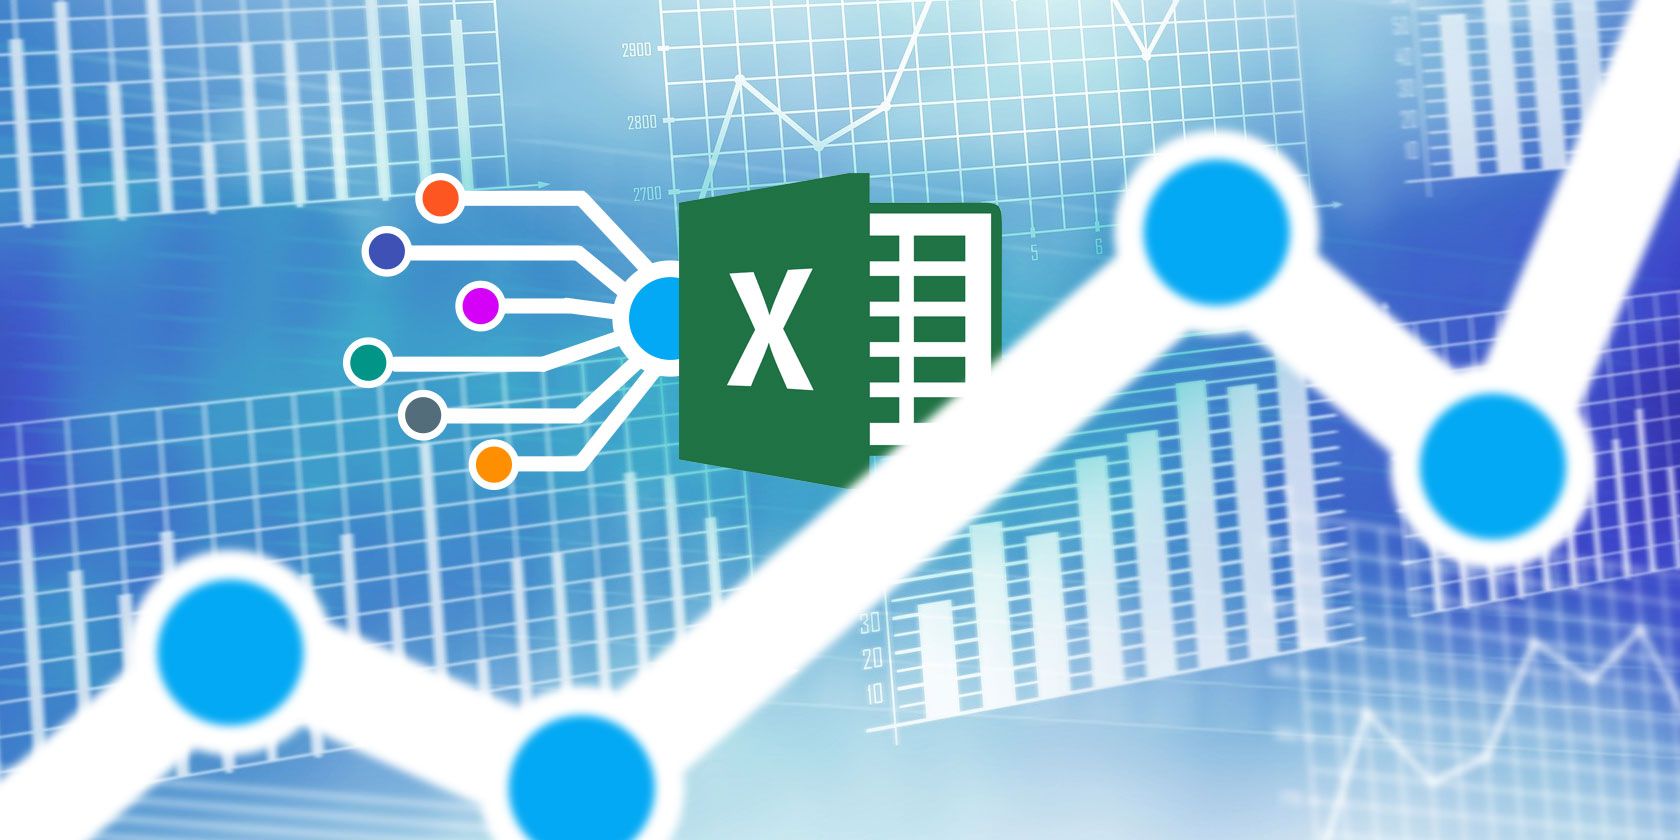 how to add data analysis toolpak in excel mac